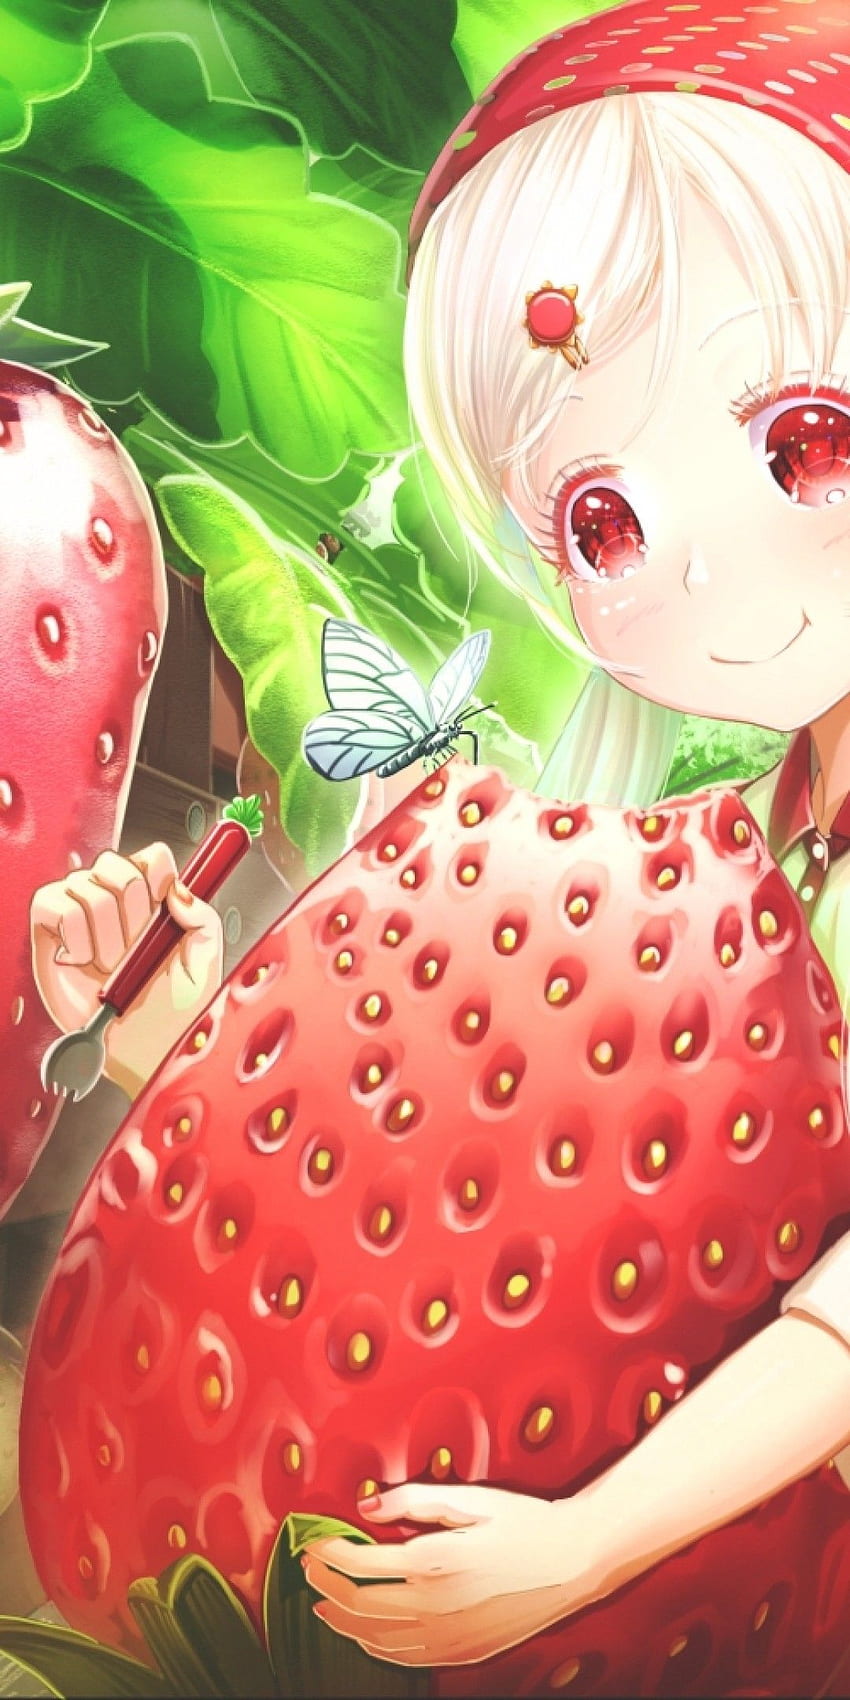 Wild Strawberry manga: Where to read, what to expect, and more